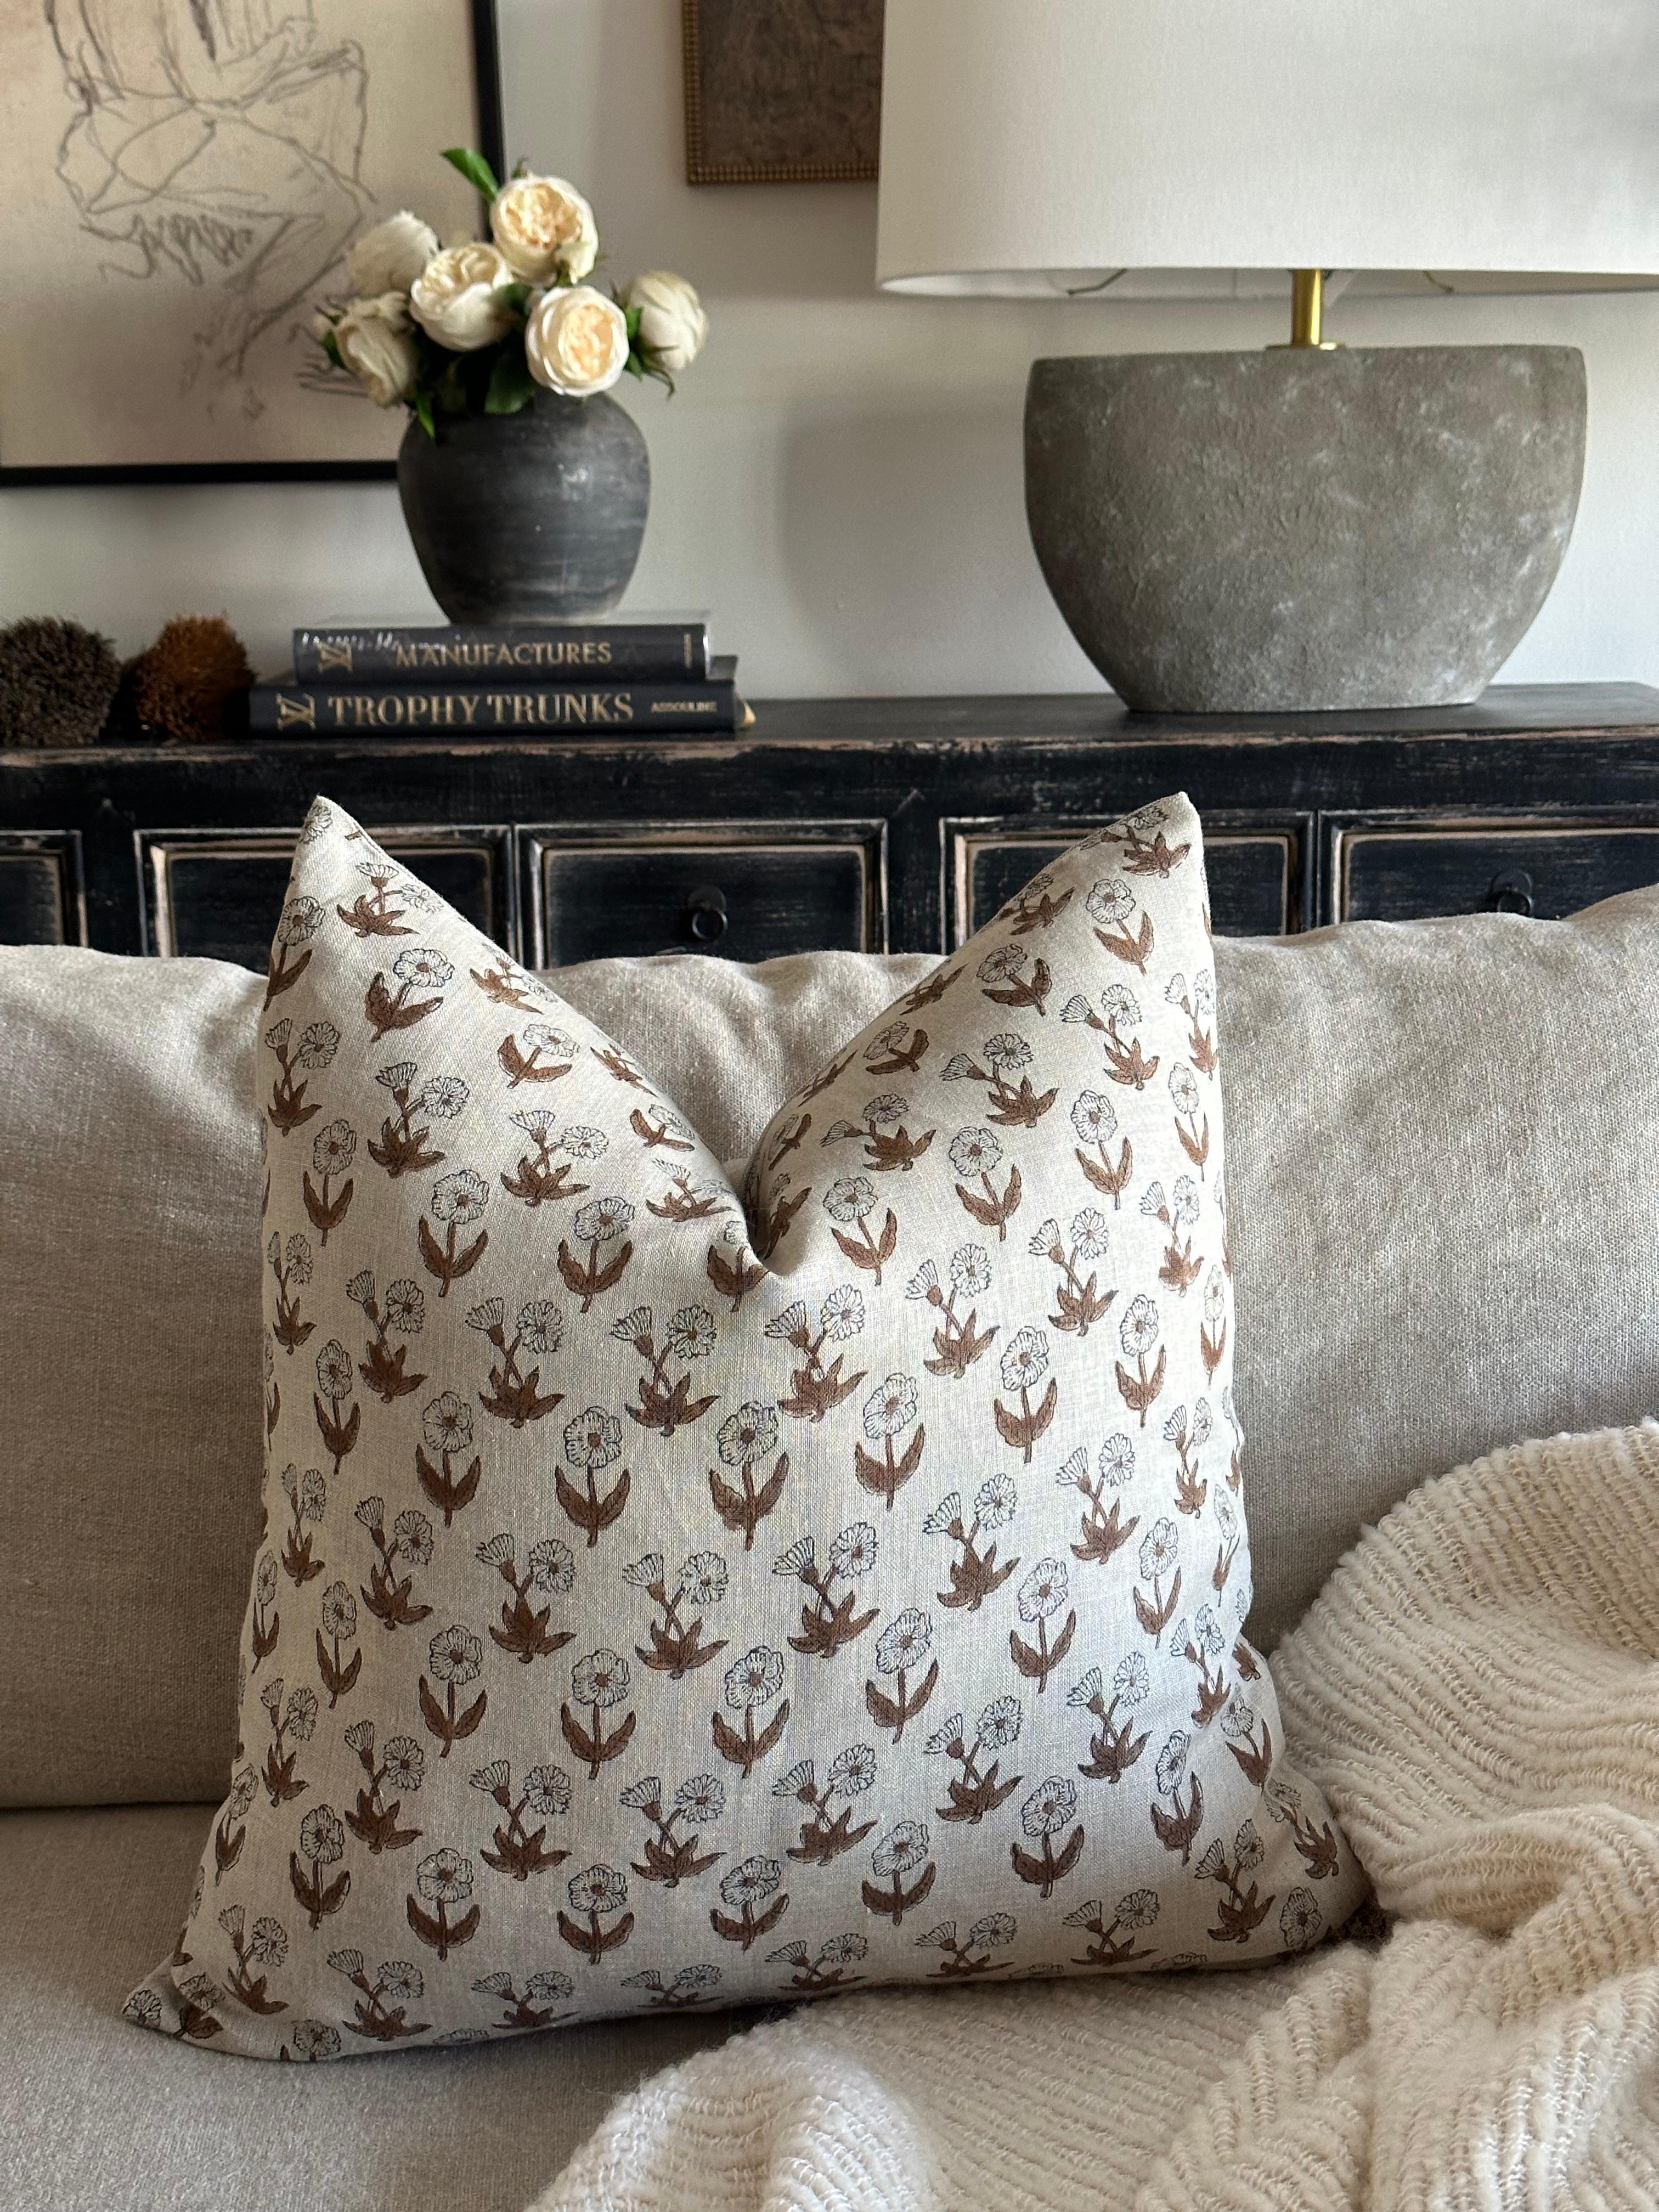 Our latest collection of beautiful hand blocked and linen pillows can be arranged to create beauty and bring a pop of color to your room while adding softness! This item is made to order and can vary in lead times.
Includes a feather down insert.
On